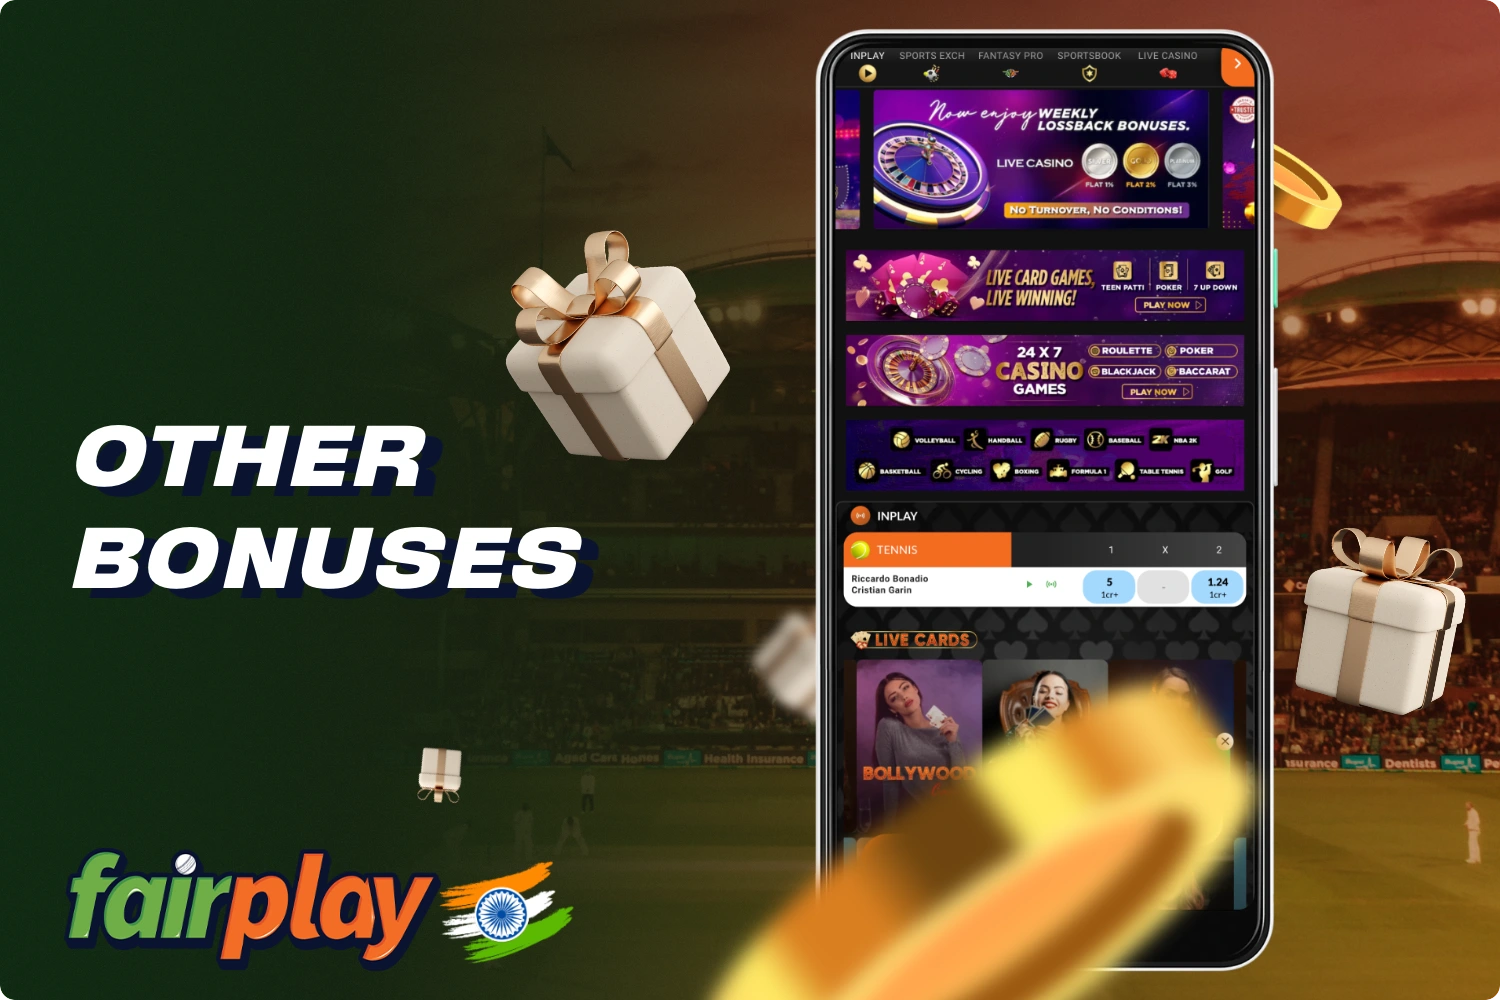 Fairplay India offers various bonuses to its users